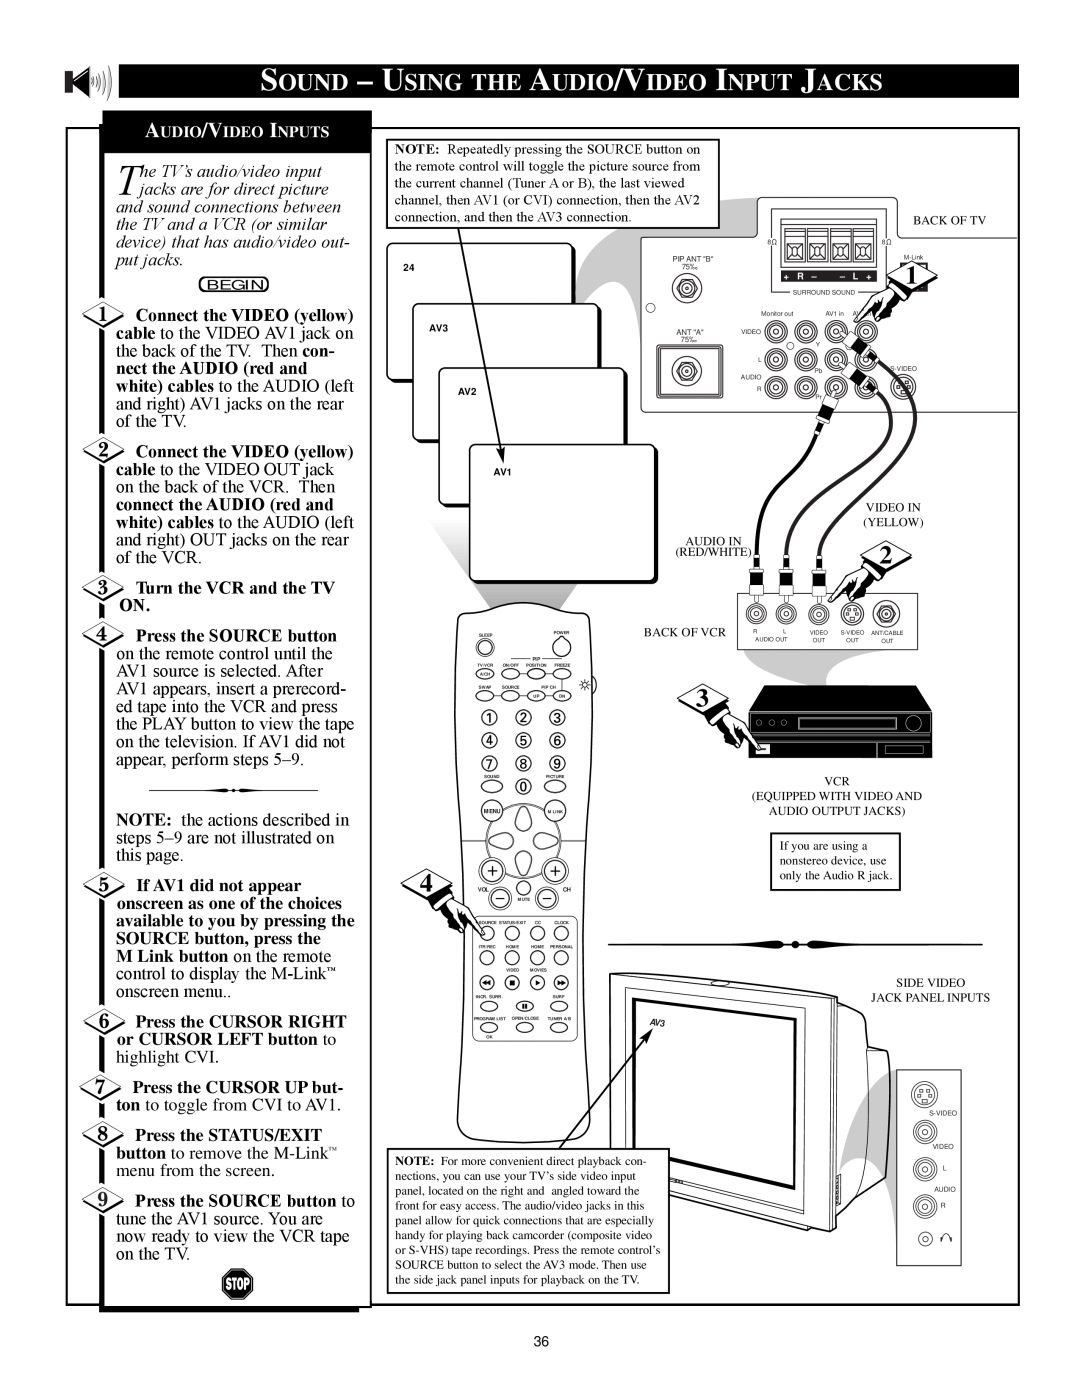 Philips 32PT81S1 manual Sound - Using The Audio/Video Input Jacks, Turn the VCR and the TV ON, Press the SOURCE button 